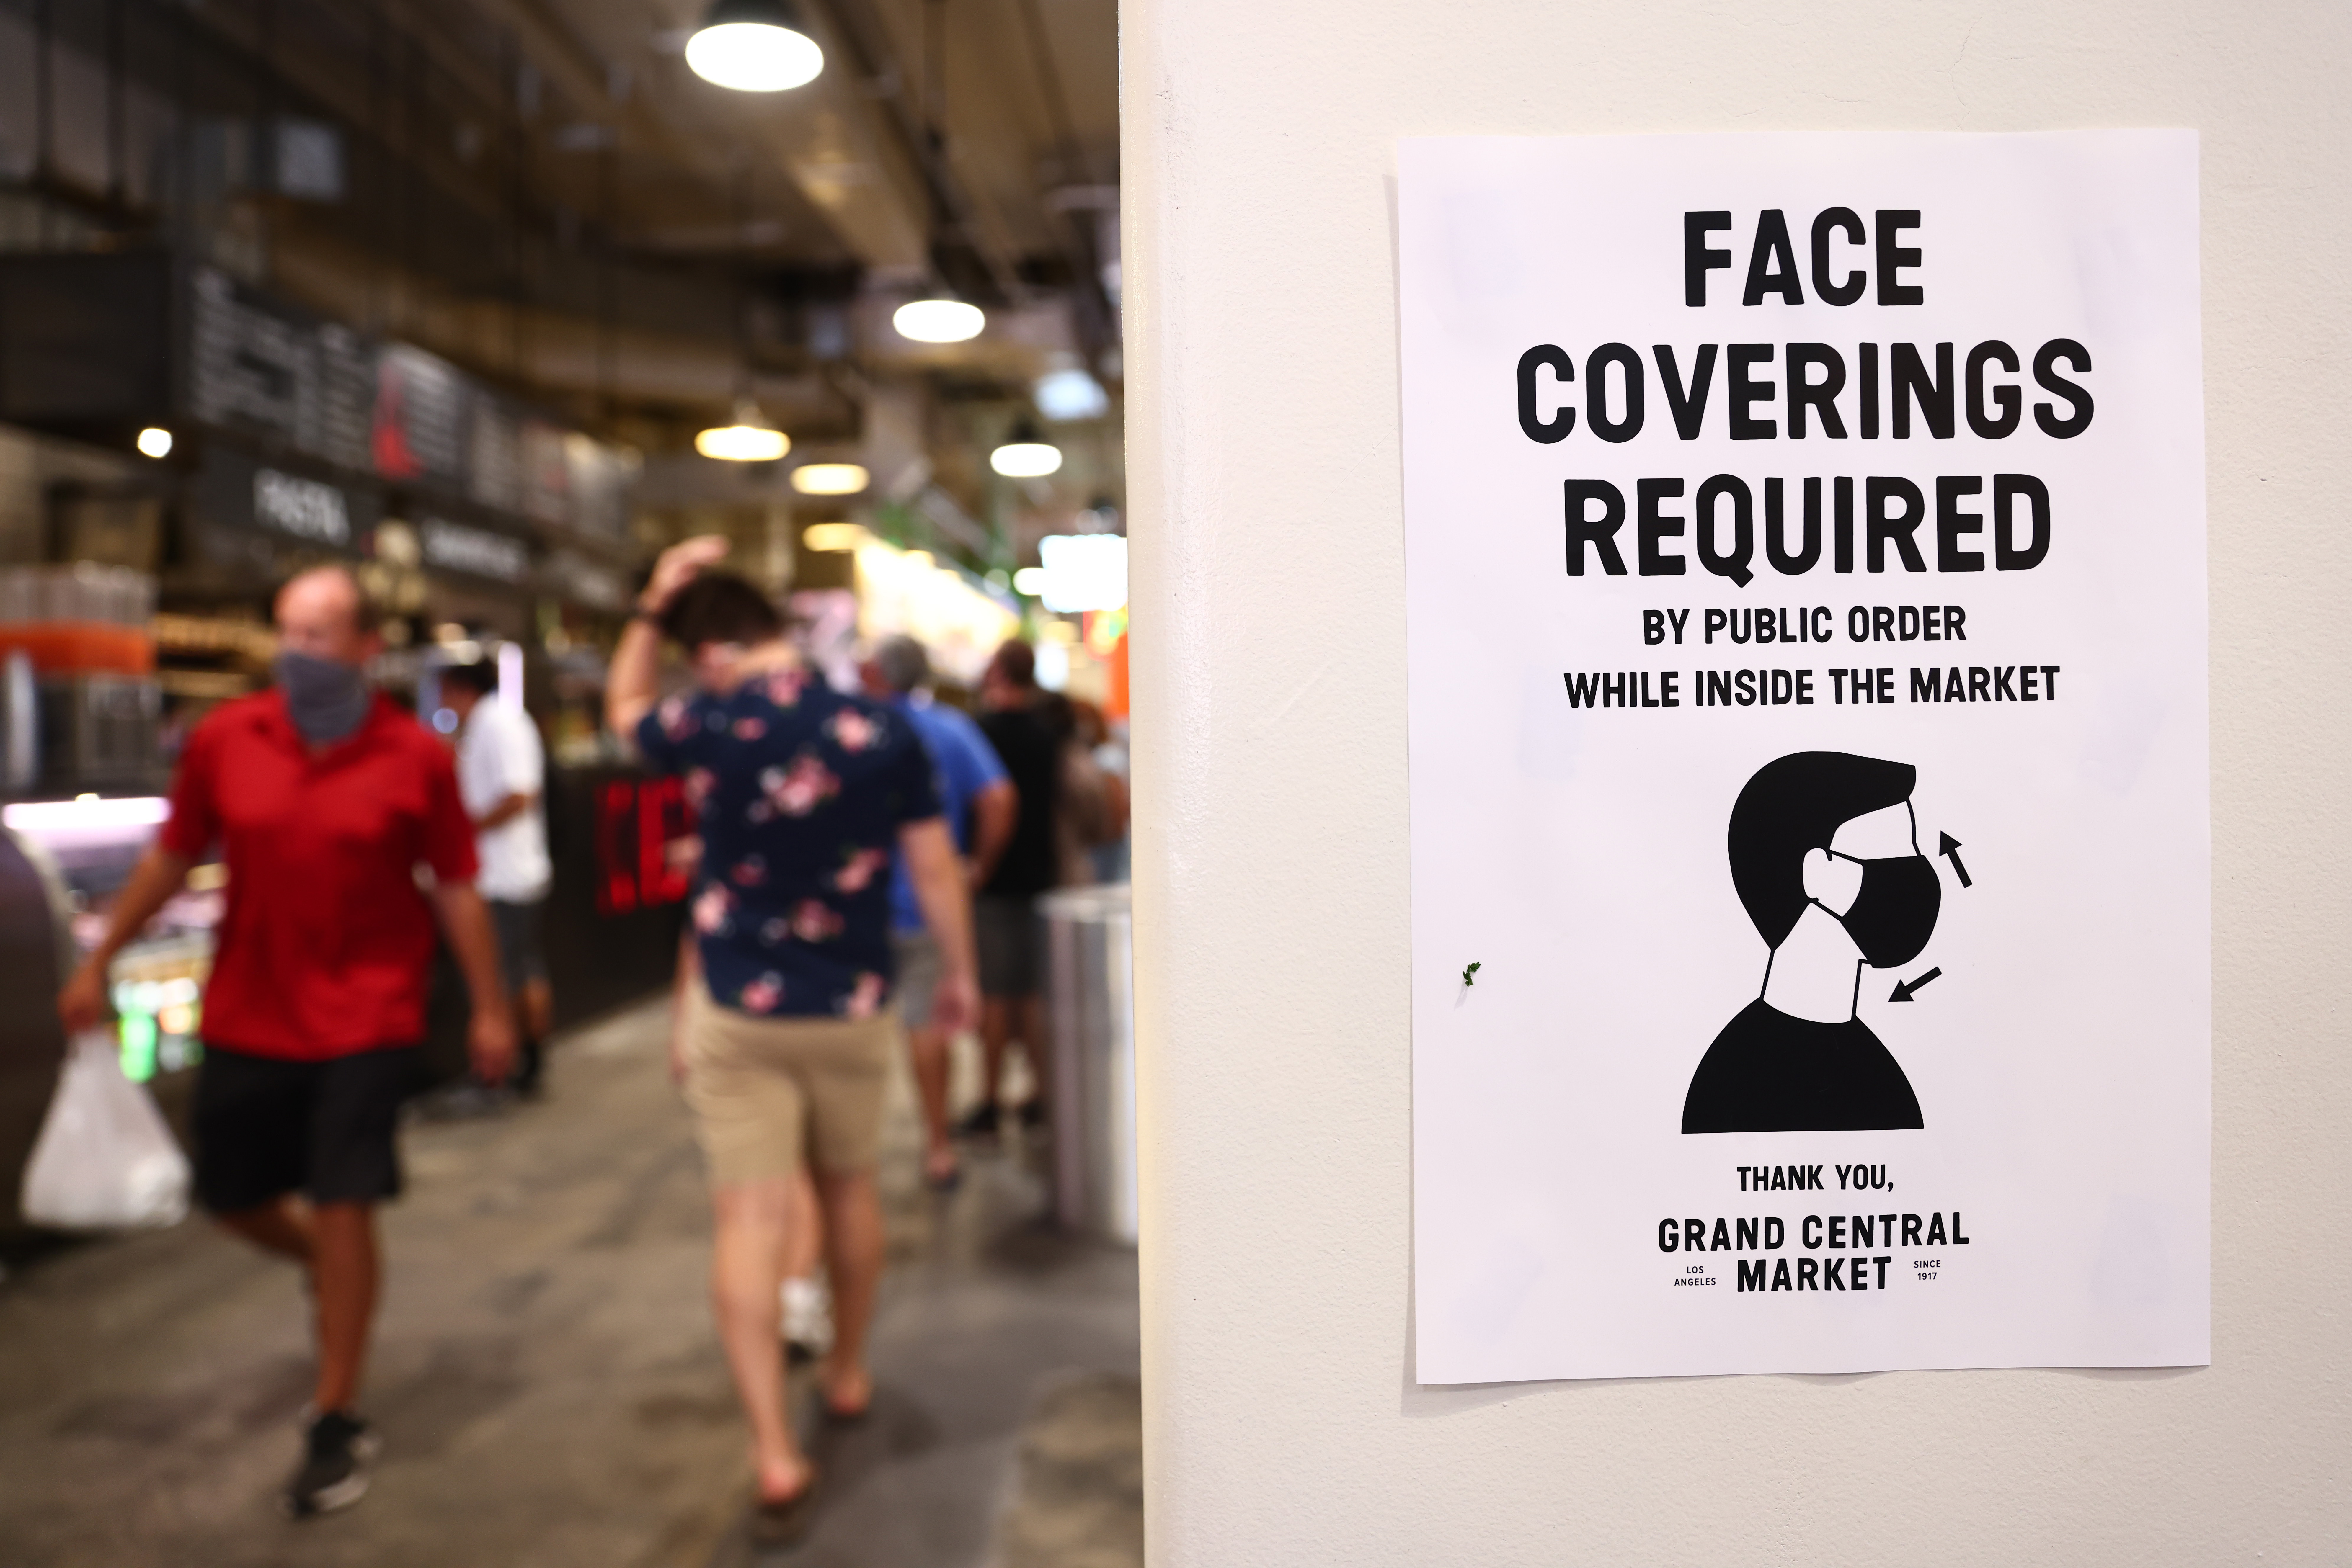 LOS ANGELES, CALIFORNIA - JULY 19: A sign is posted about required face coverings in Grand Central Market on July 19, 2021 in Los Angeles, California. A new mask mandate went into effect just before midnight on July 17th in Los Angeles County requiring all people, regardless of vaccination status, to wear a face covering in public indoor spaces amid a troubling rise in COVID-19 cases. (Photo by Mario Tama/Getty Images)